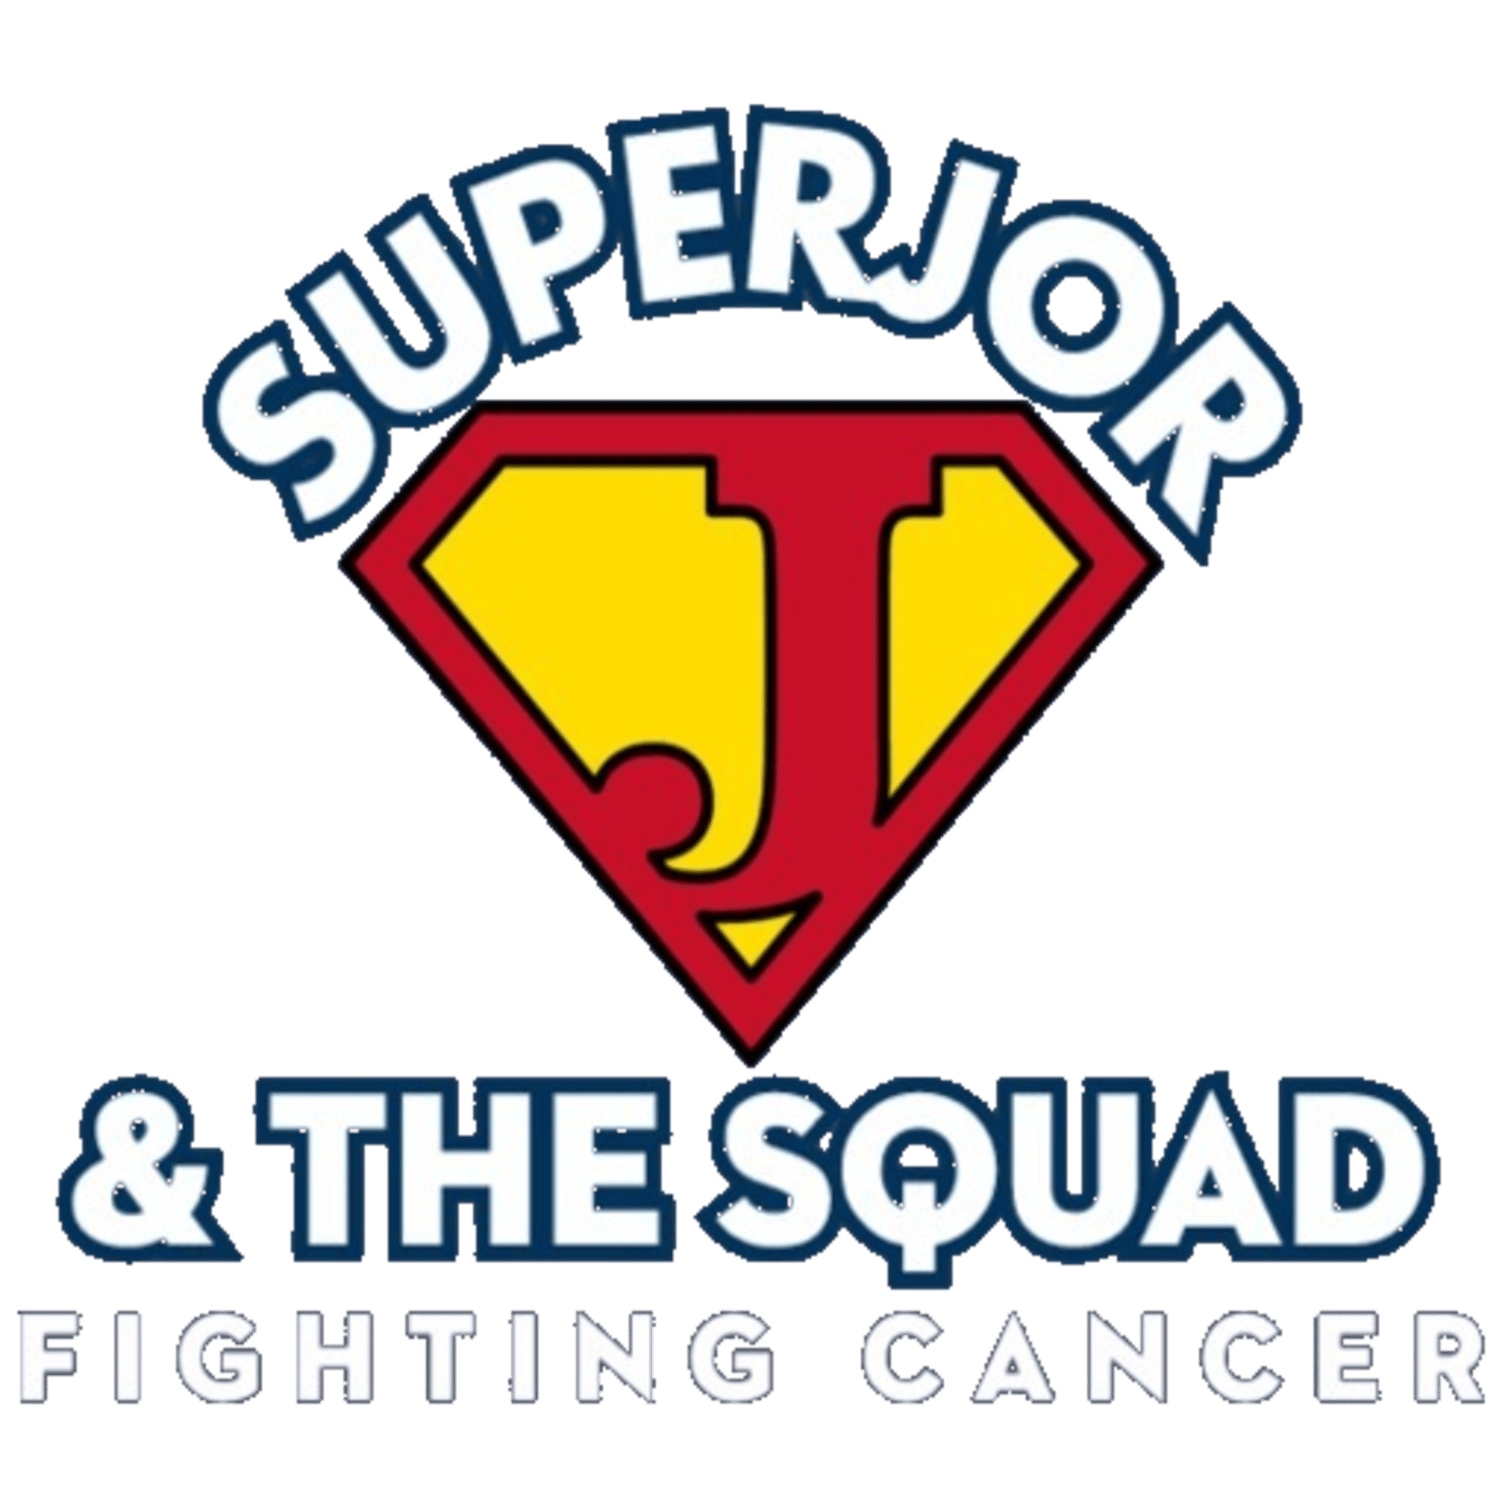 SuperJor & The SQUAD Fighting Cancer